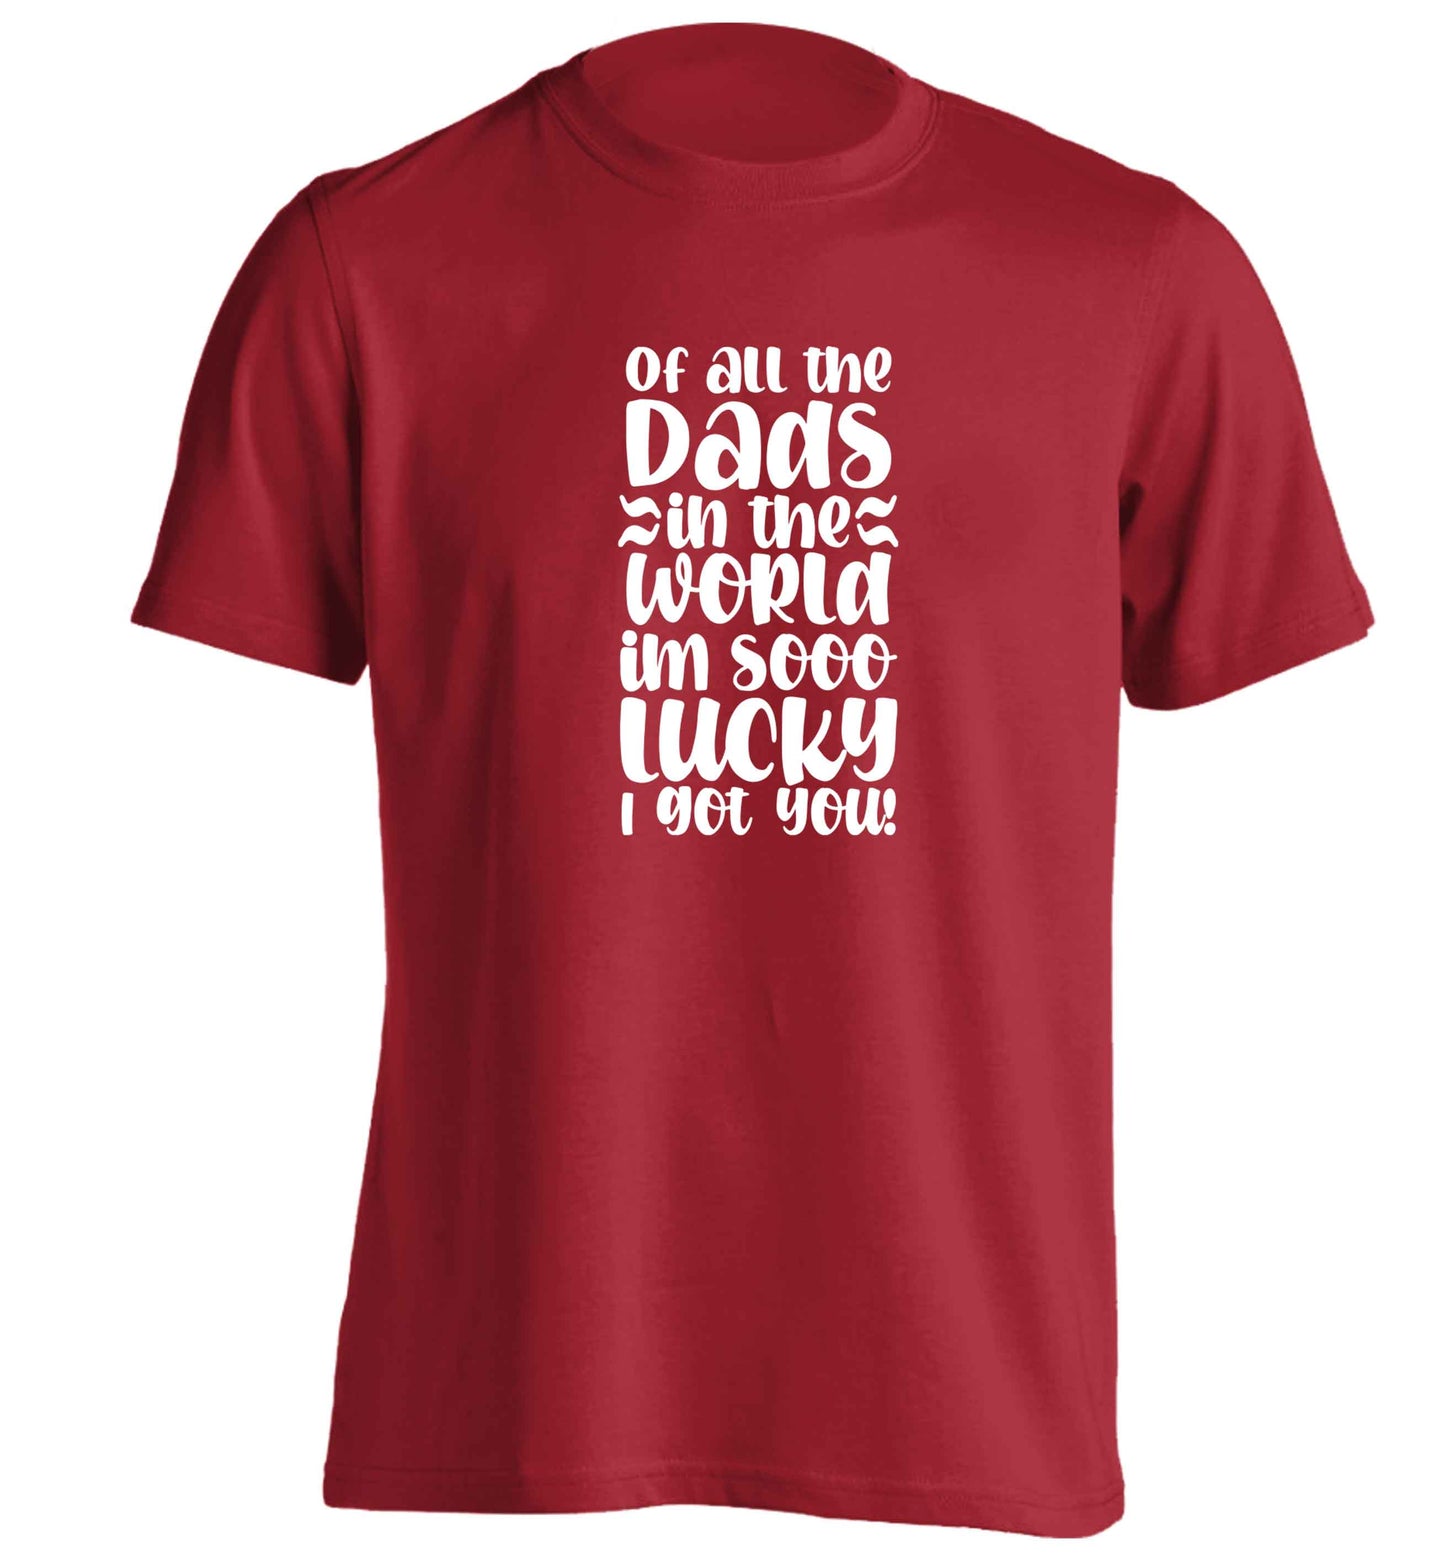 Of all the Dads in the world I'm so lucky I got you adults unisex red Tshirt 2XL